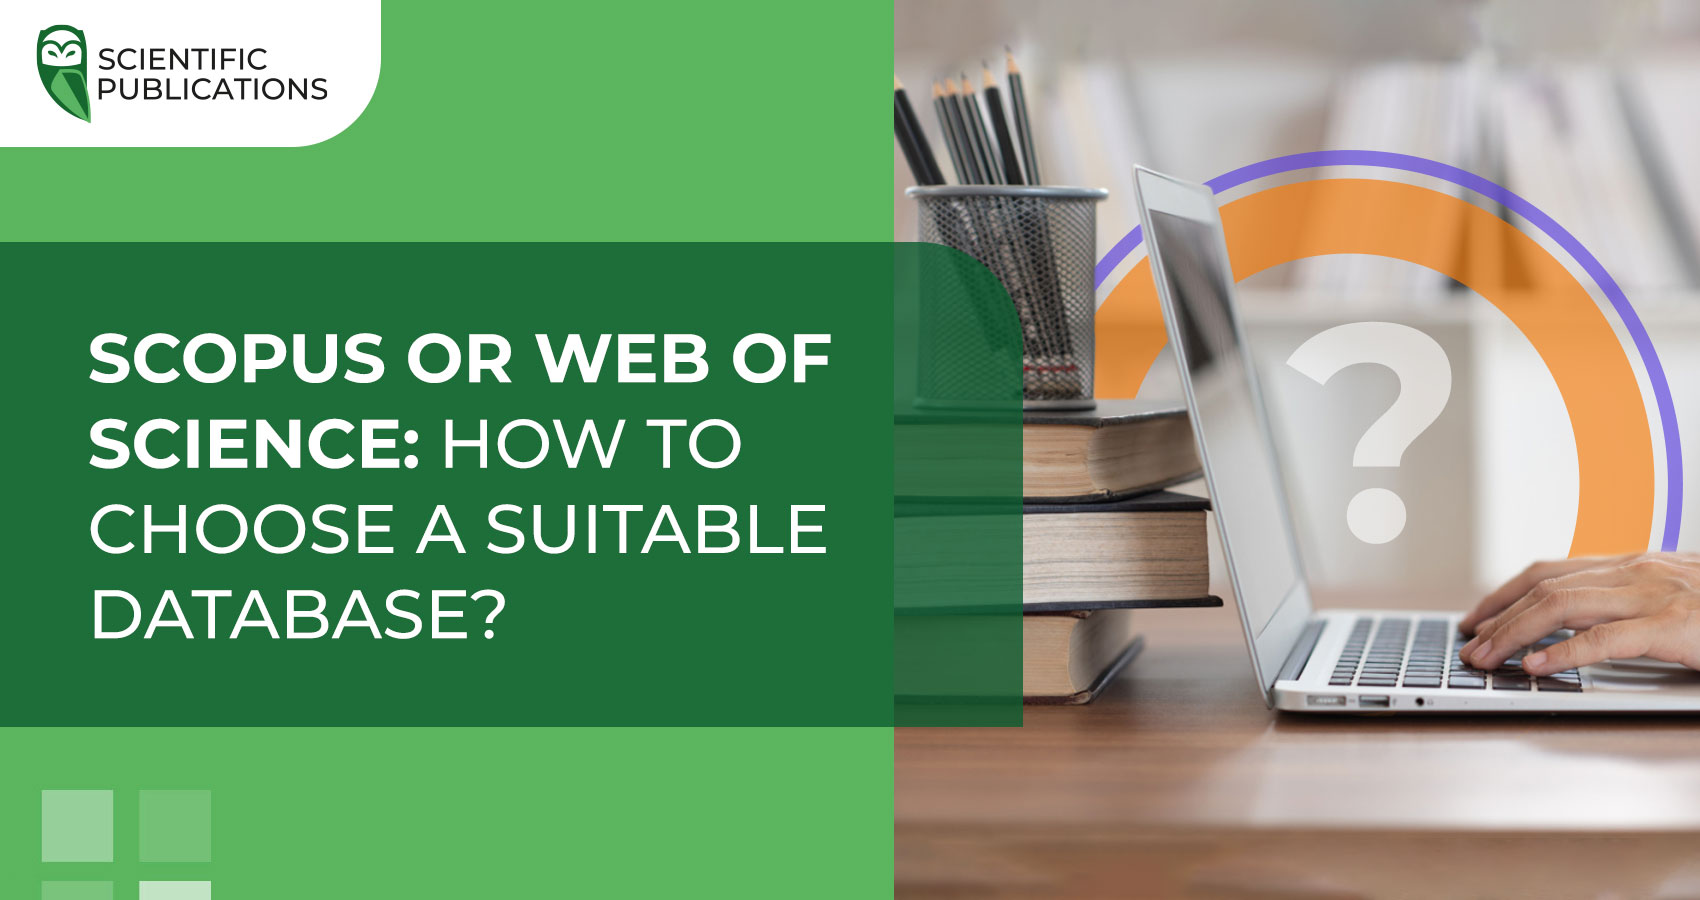 Scopus or Web of Science: how to choose a suitable database?